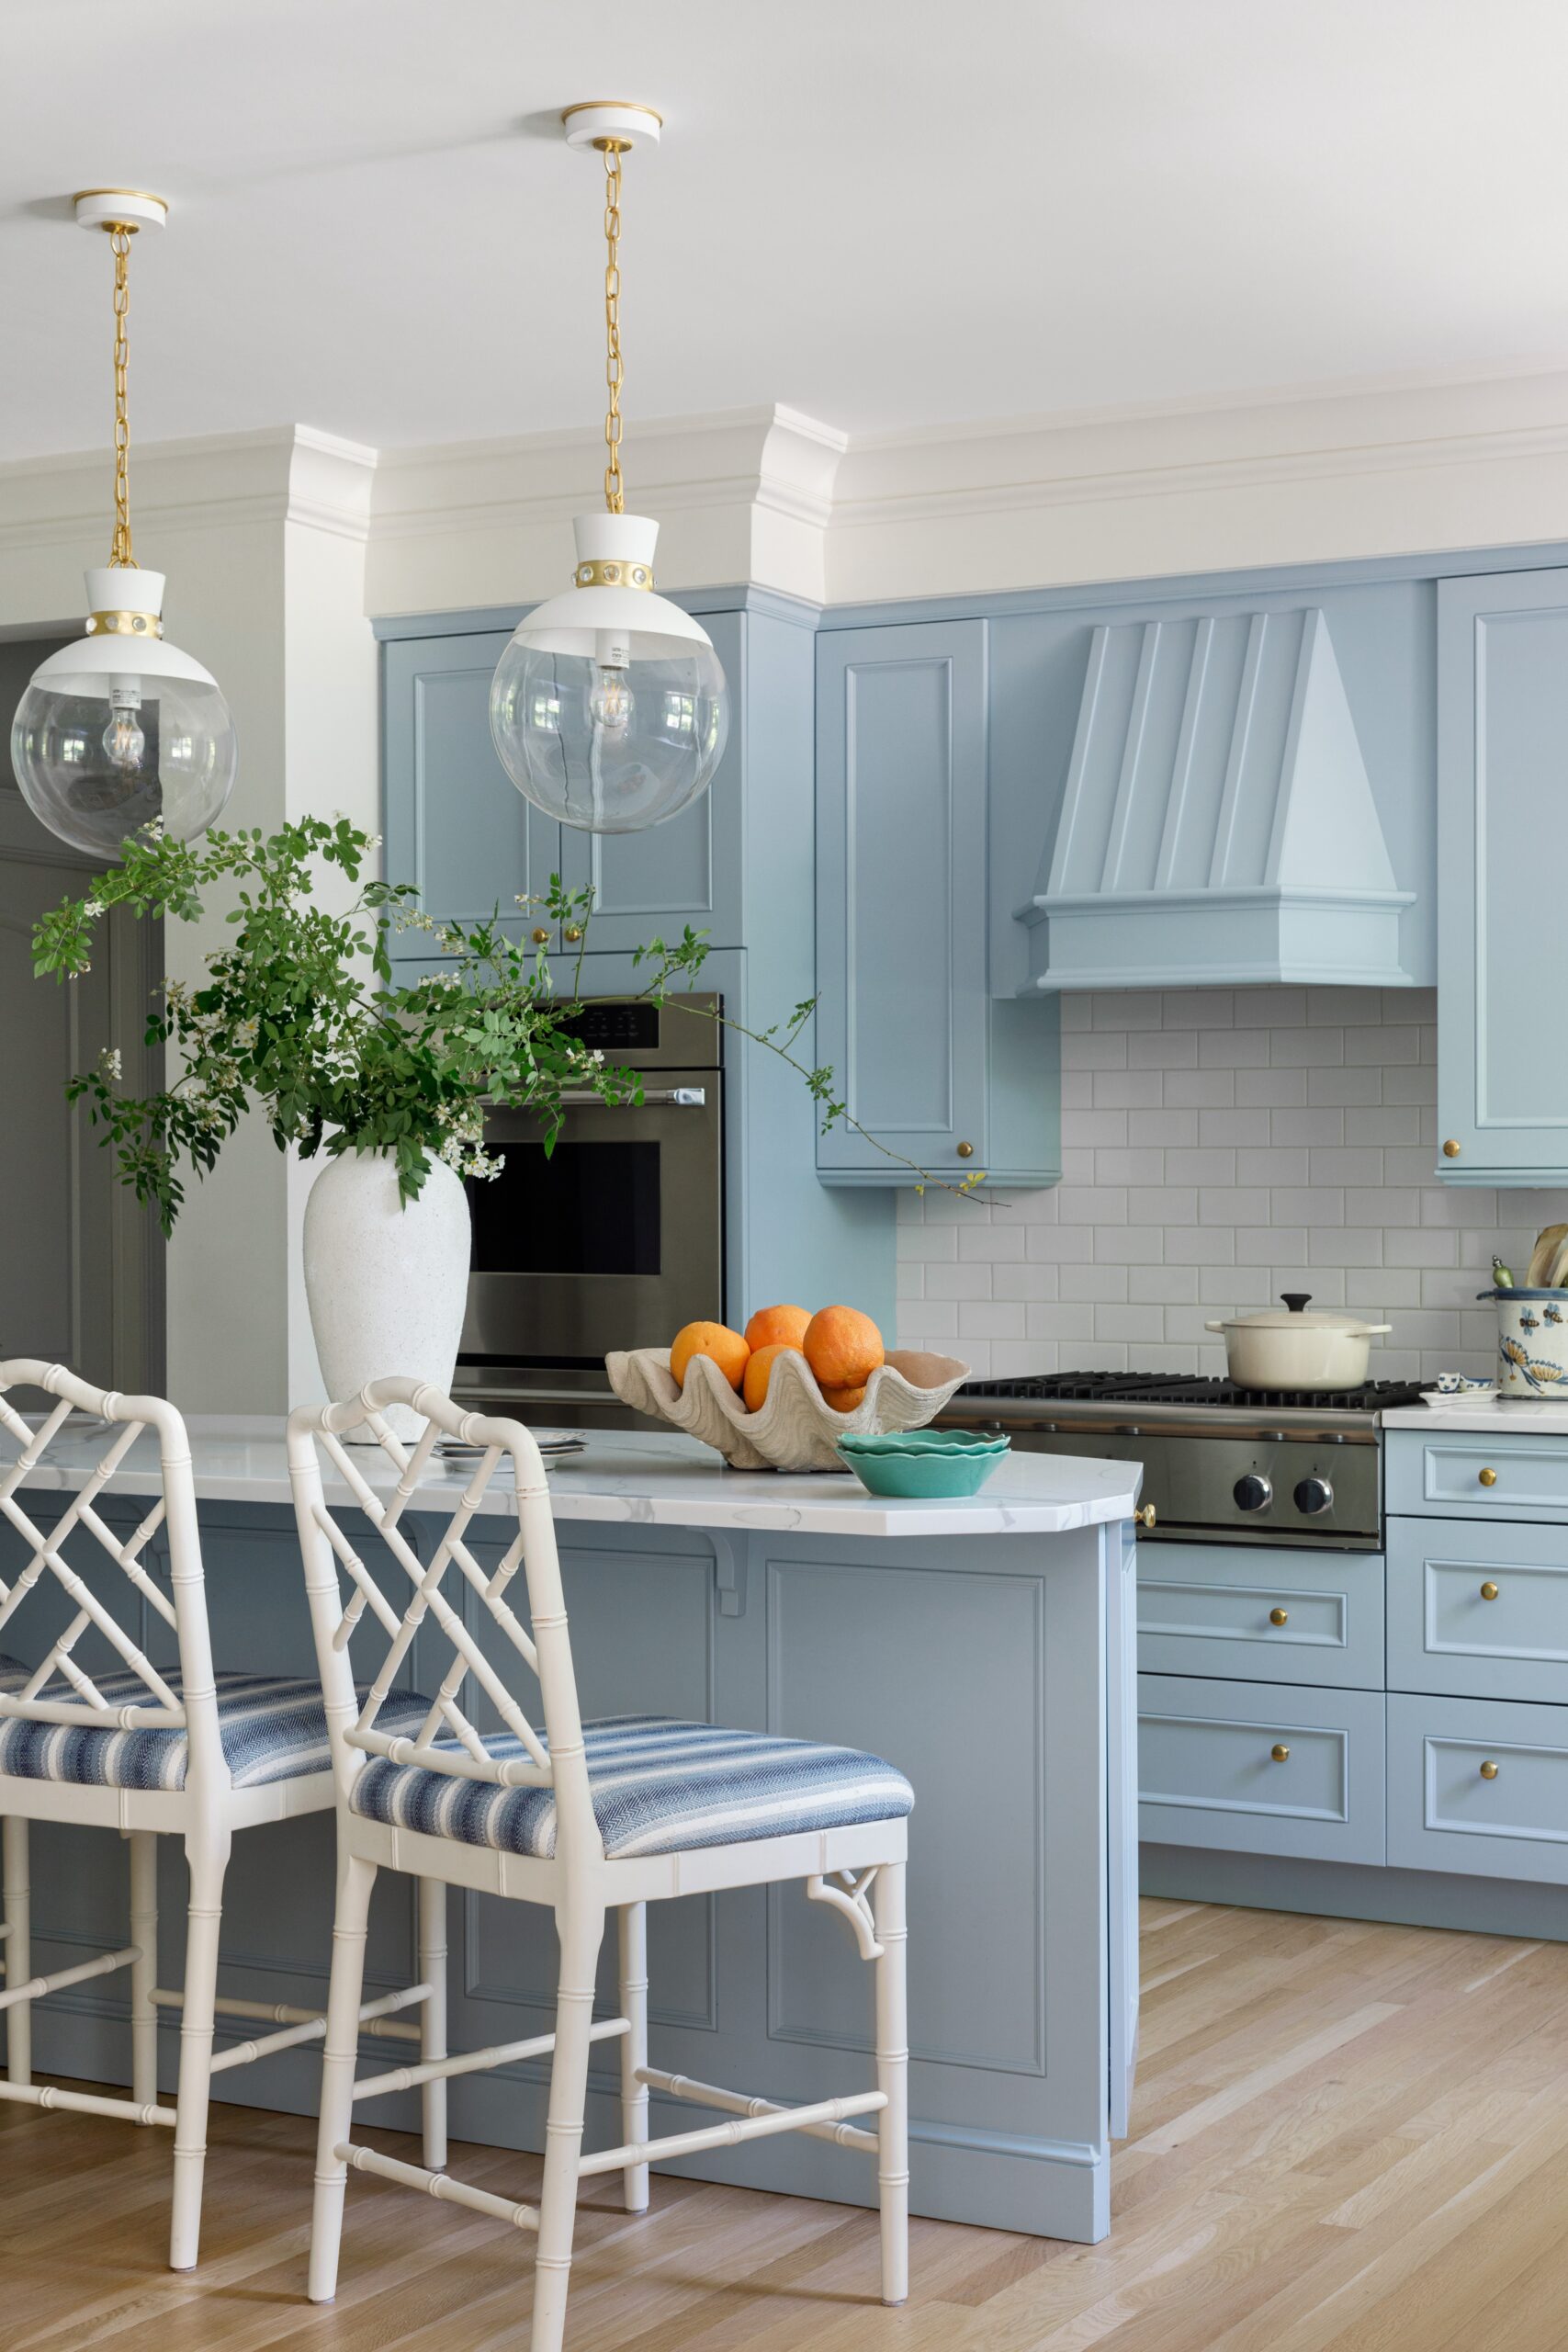 Fresh young design with traditional style kitchen with powder blue color scheme by Alexandra Kaehler.